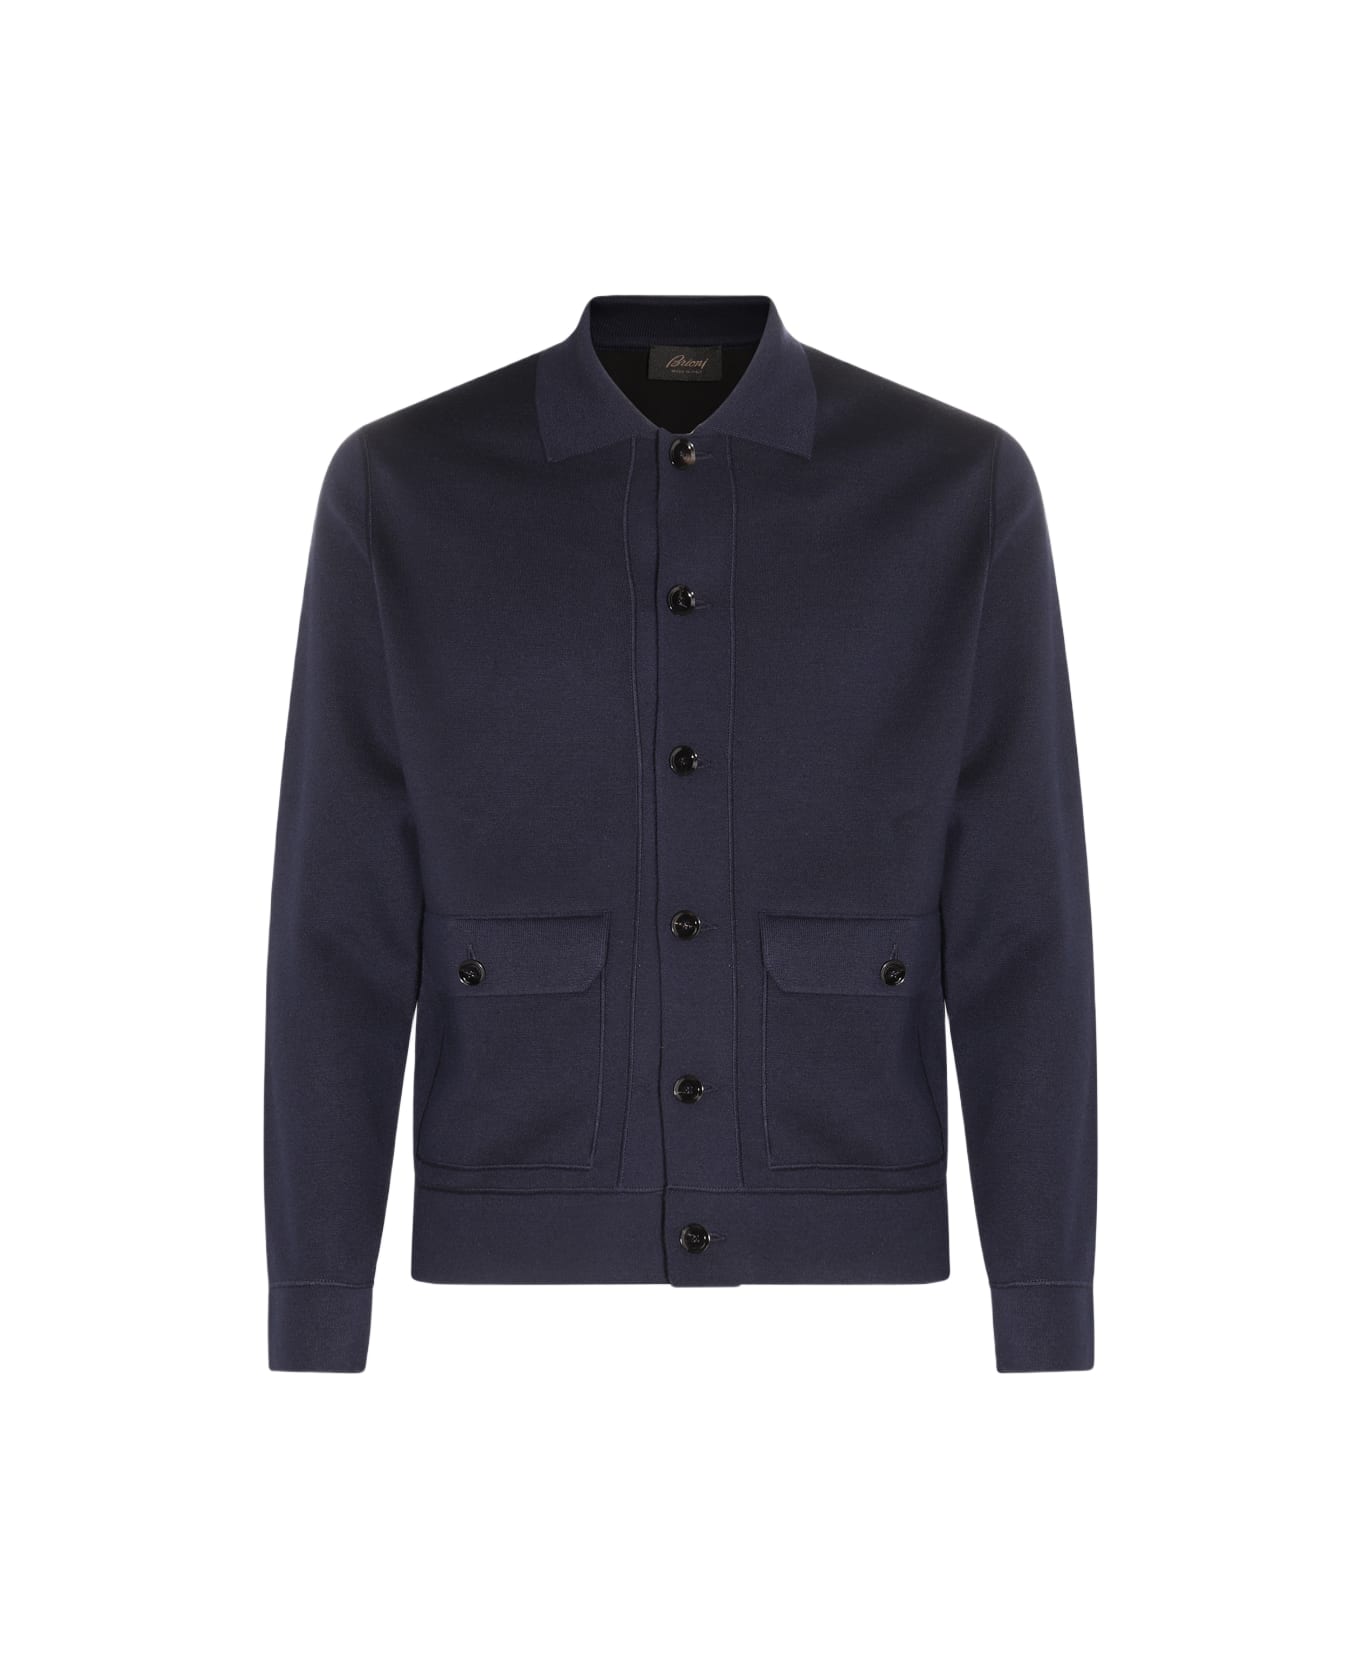 Brioni Navy Cotton And Cashmere Blend Casual Jacket - Blue